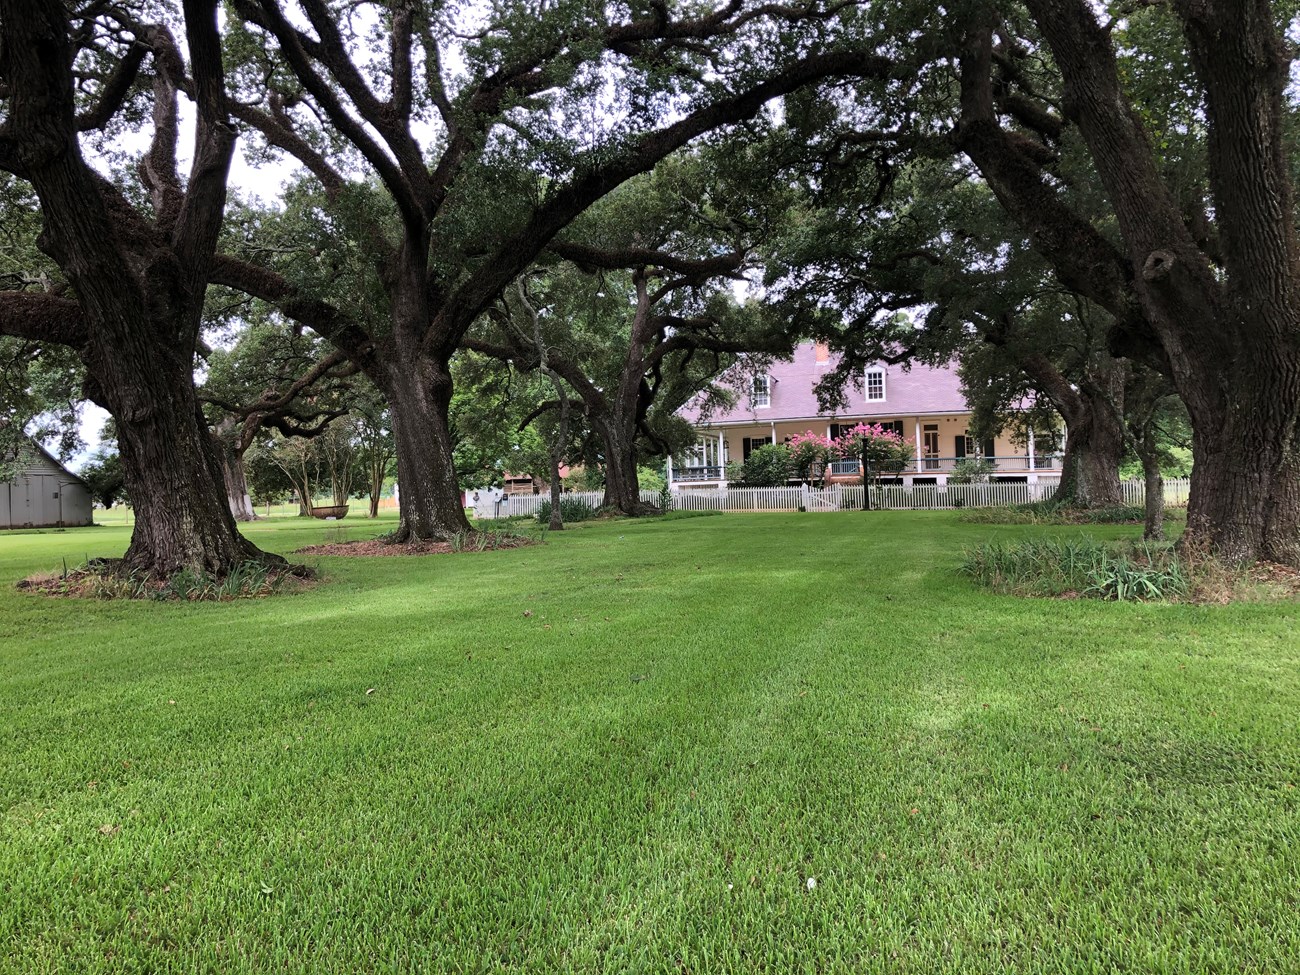 A house stands at the end of a turf-covered path with a row of mature live oak trees on each side